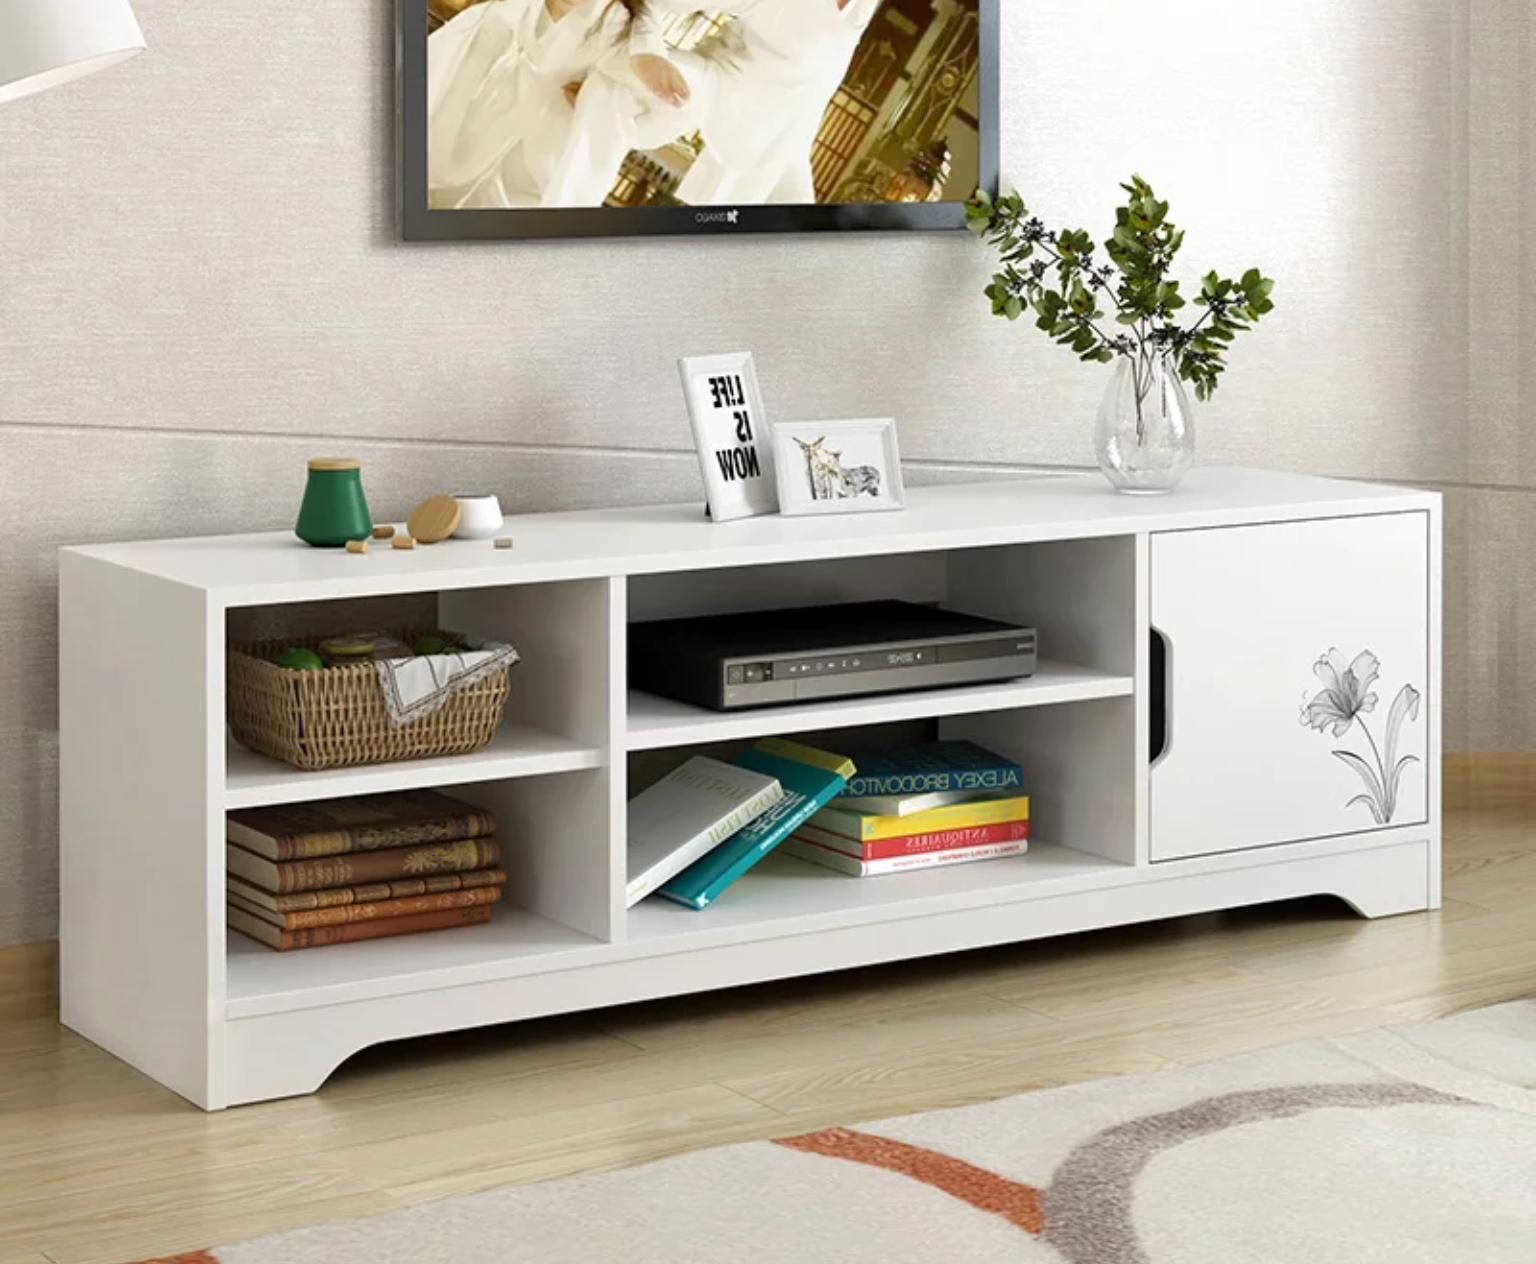 Popular Tv Rack For Sale – Tv Cabinet Prices, Brands & Review In Philippines With Regard To Single Shelf Tv Stands (Photo 14 of 20)